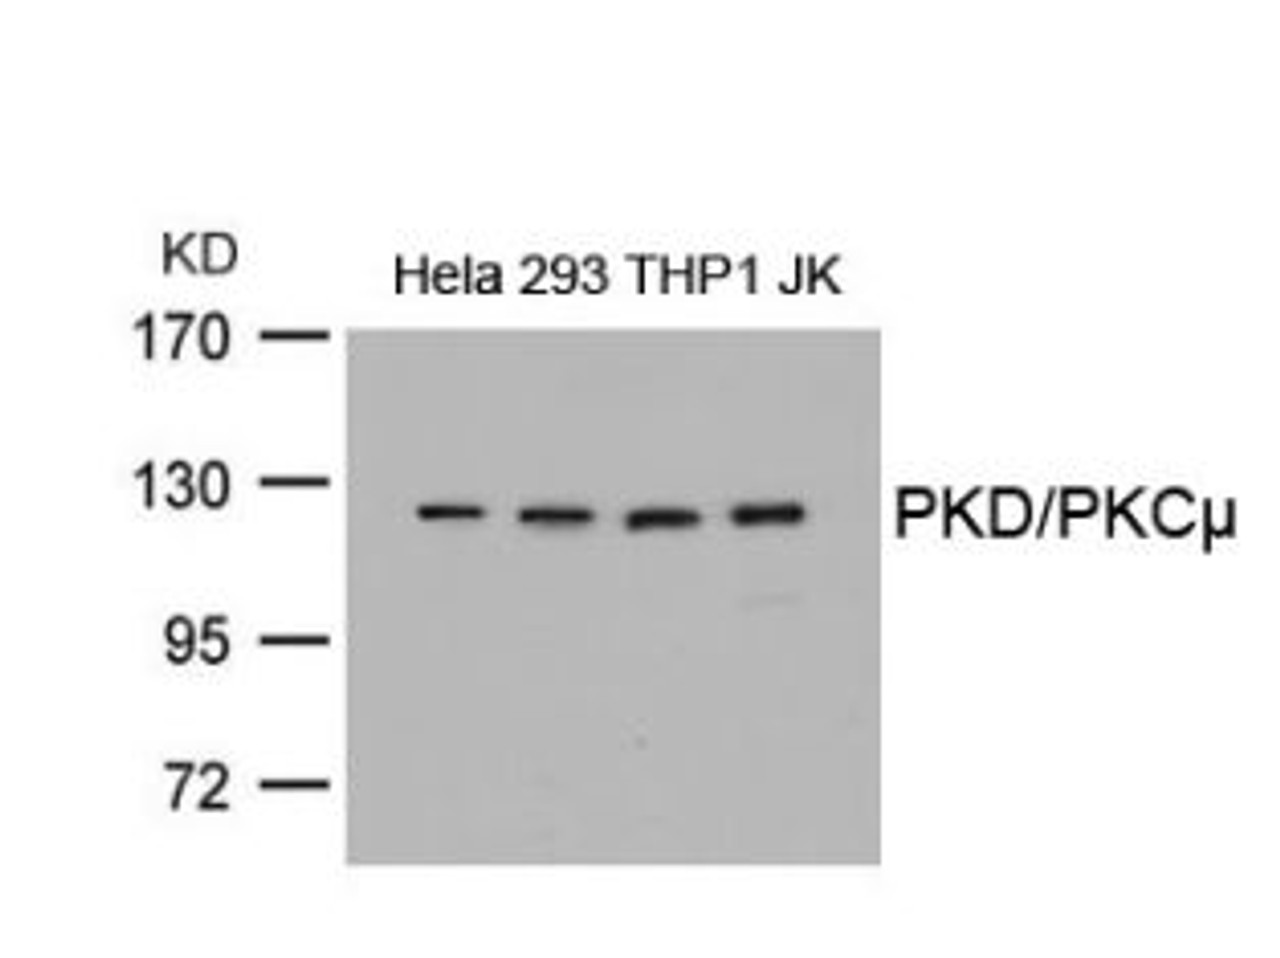 Western blot analysis of lysed extracts from HeLa, 293, THP1 and JK cells using PKD/PKC&#956; (Ab-738) .